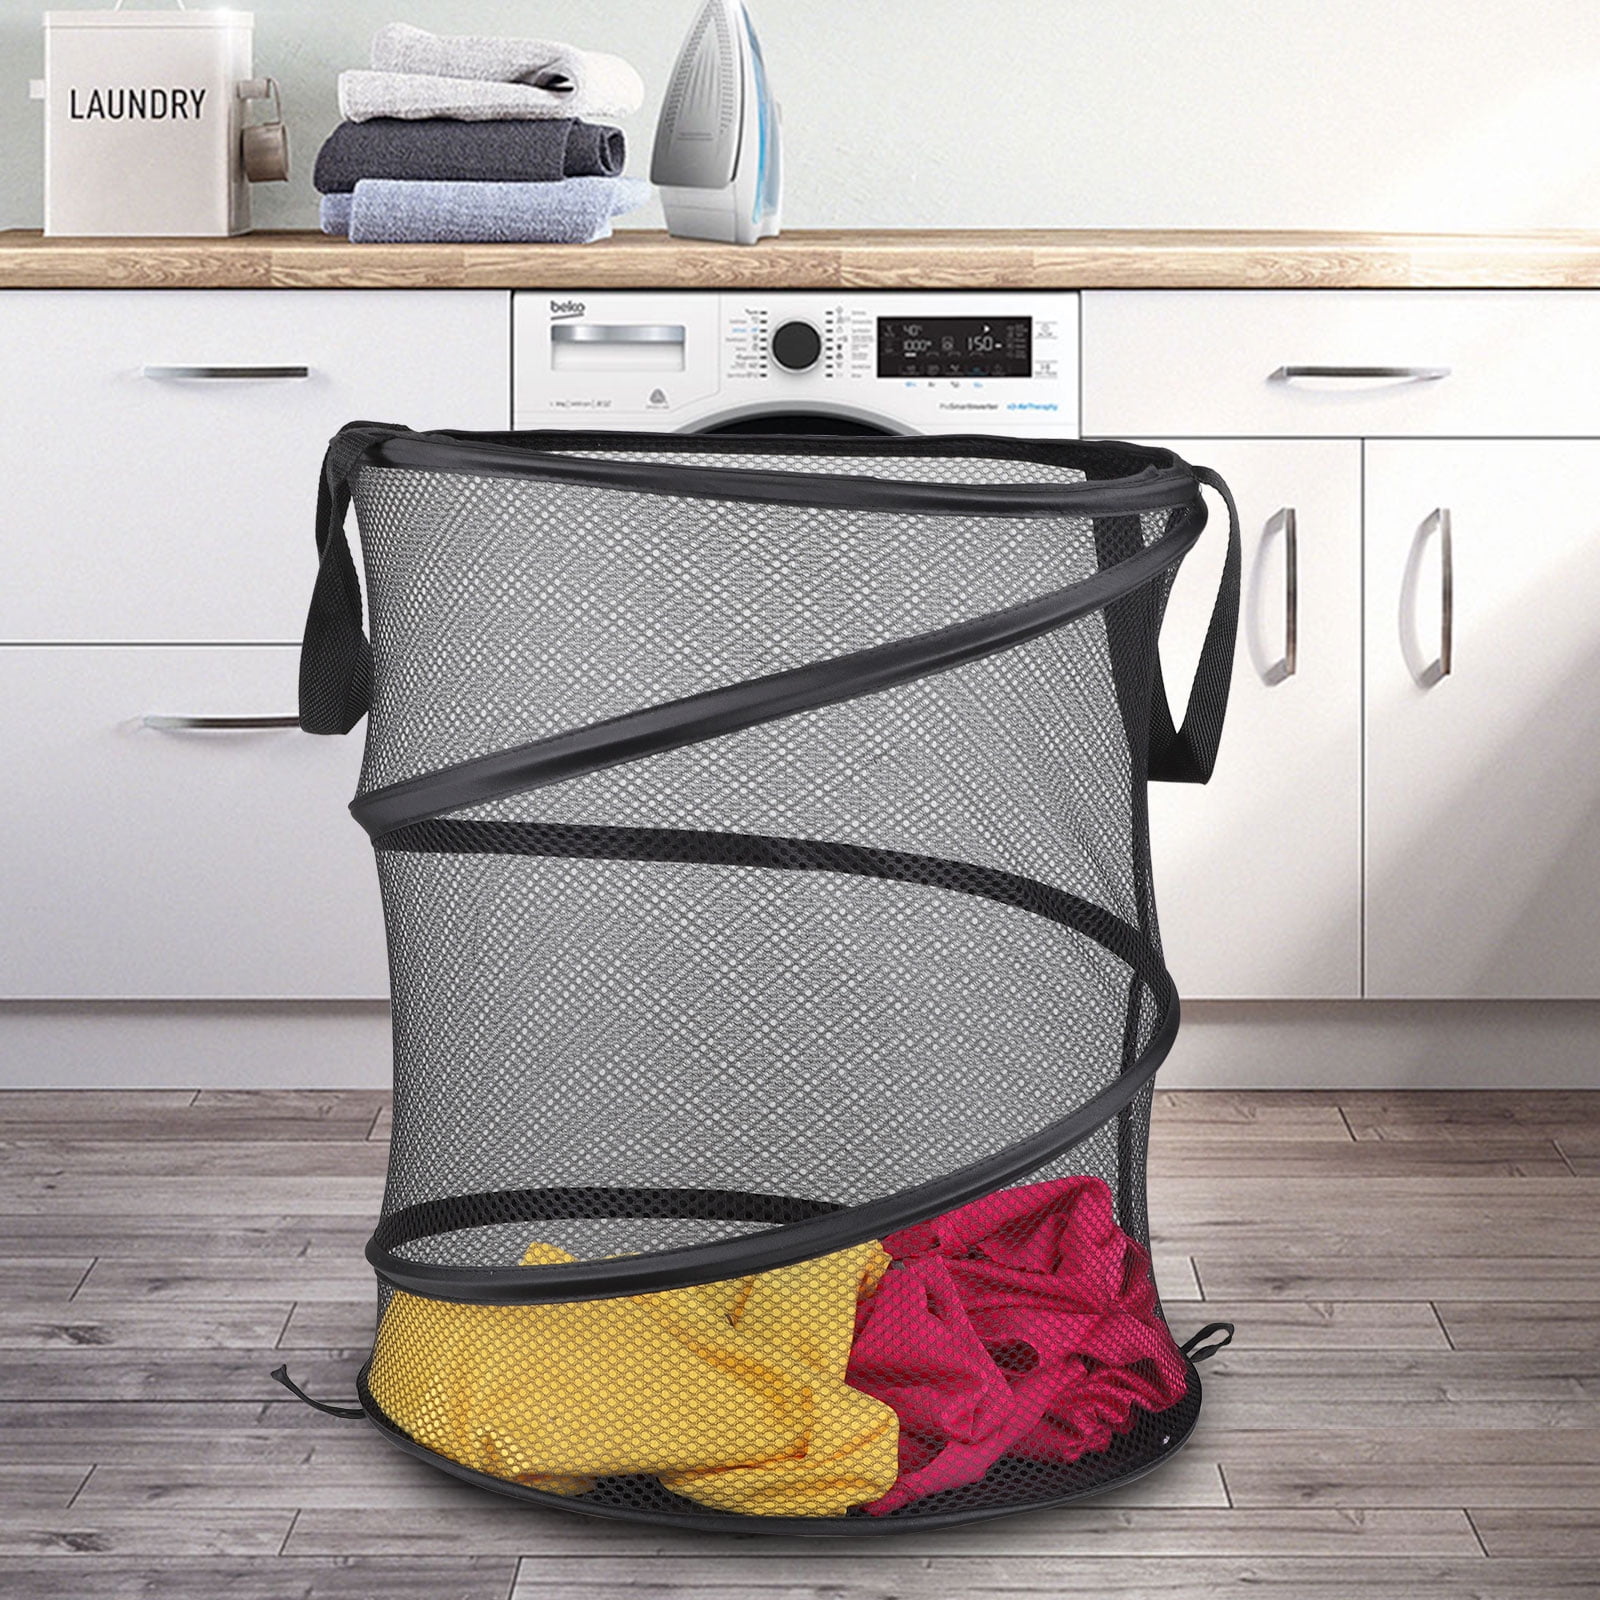 Mesh Pop-Up Laundry Hampers Portable and Collapsible Storage with Side Pocket and Durable Handles Folding Clothes Hampers Suitable for Kids Room and Bathroom Pink, 1 WishLotus Dirty Clothes Basket 